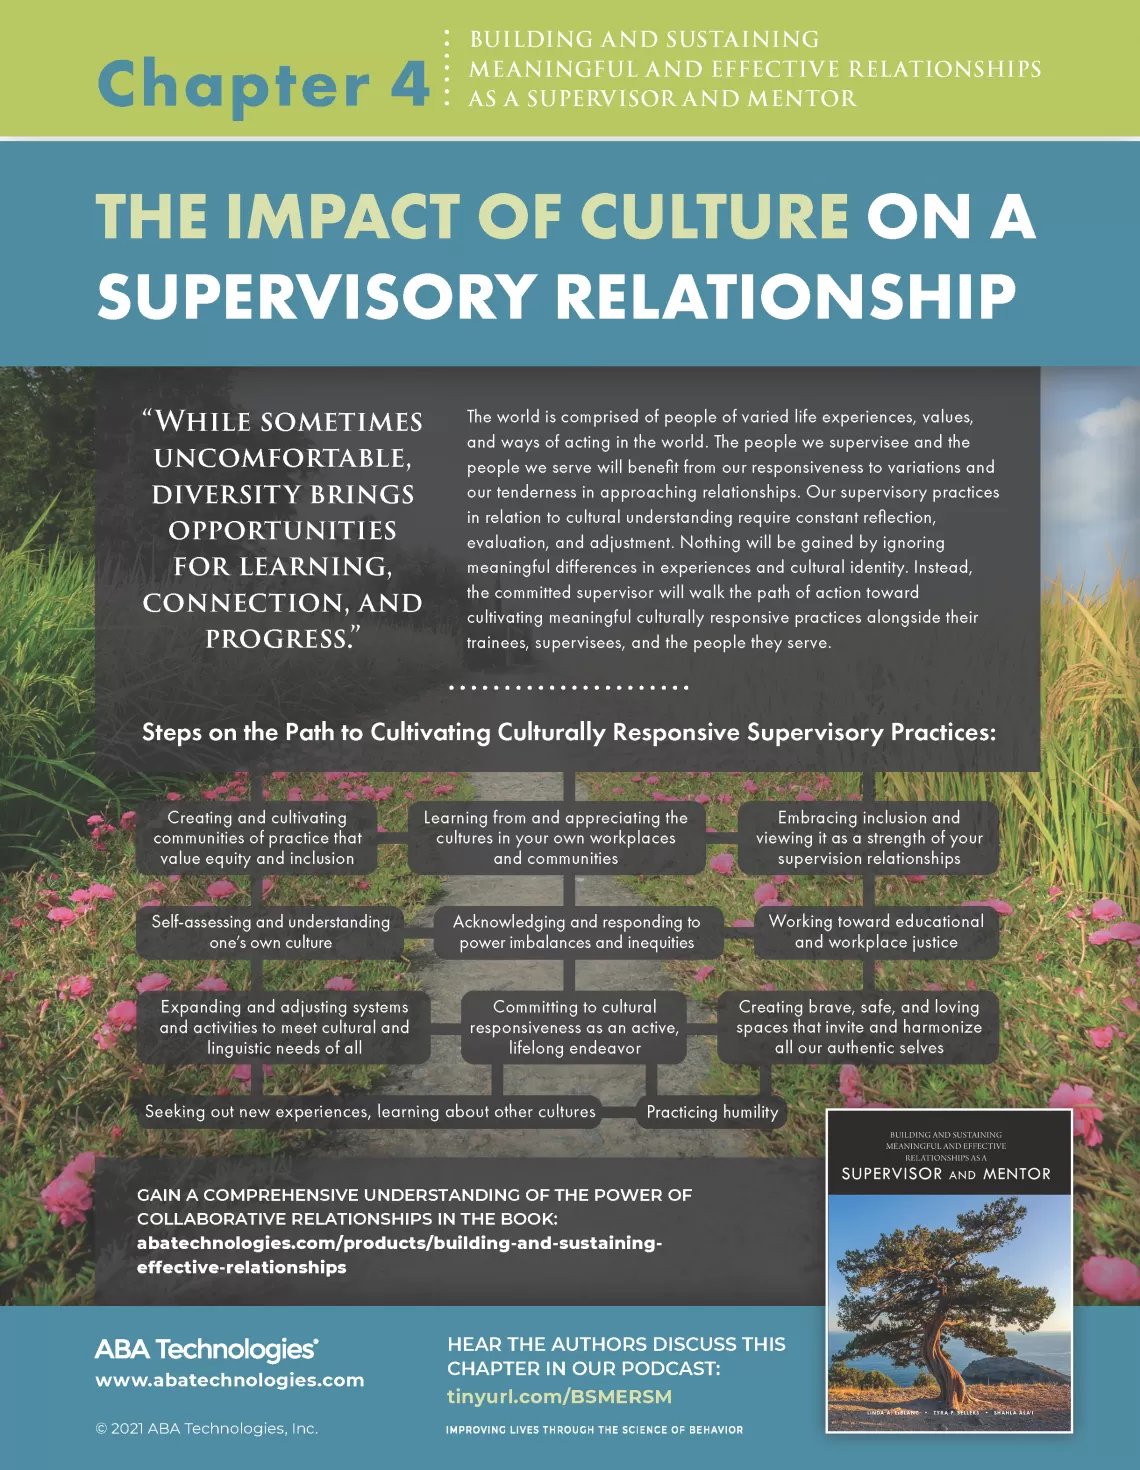 Building and Sustaining Meaningful and Effective relationships as a supervisor and mentor chapter 4 part 1 infographic